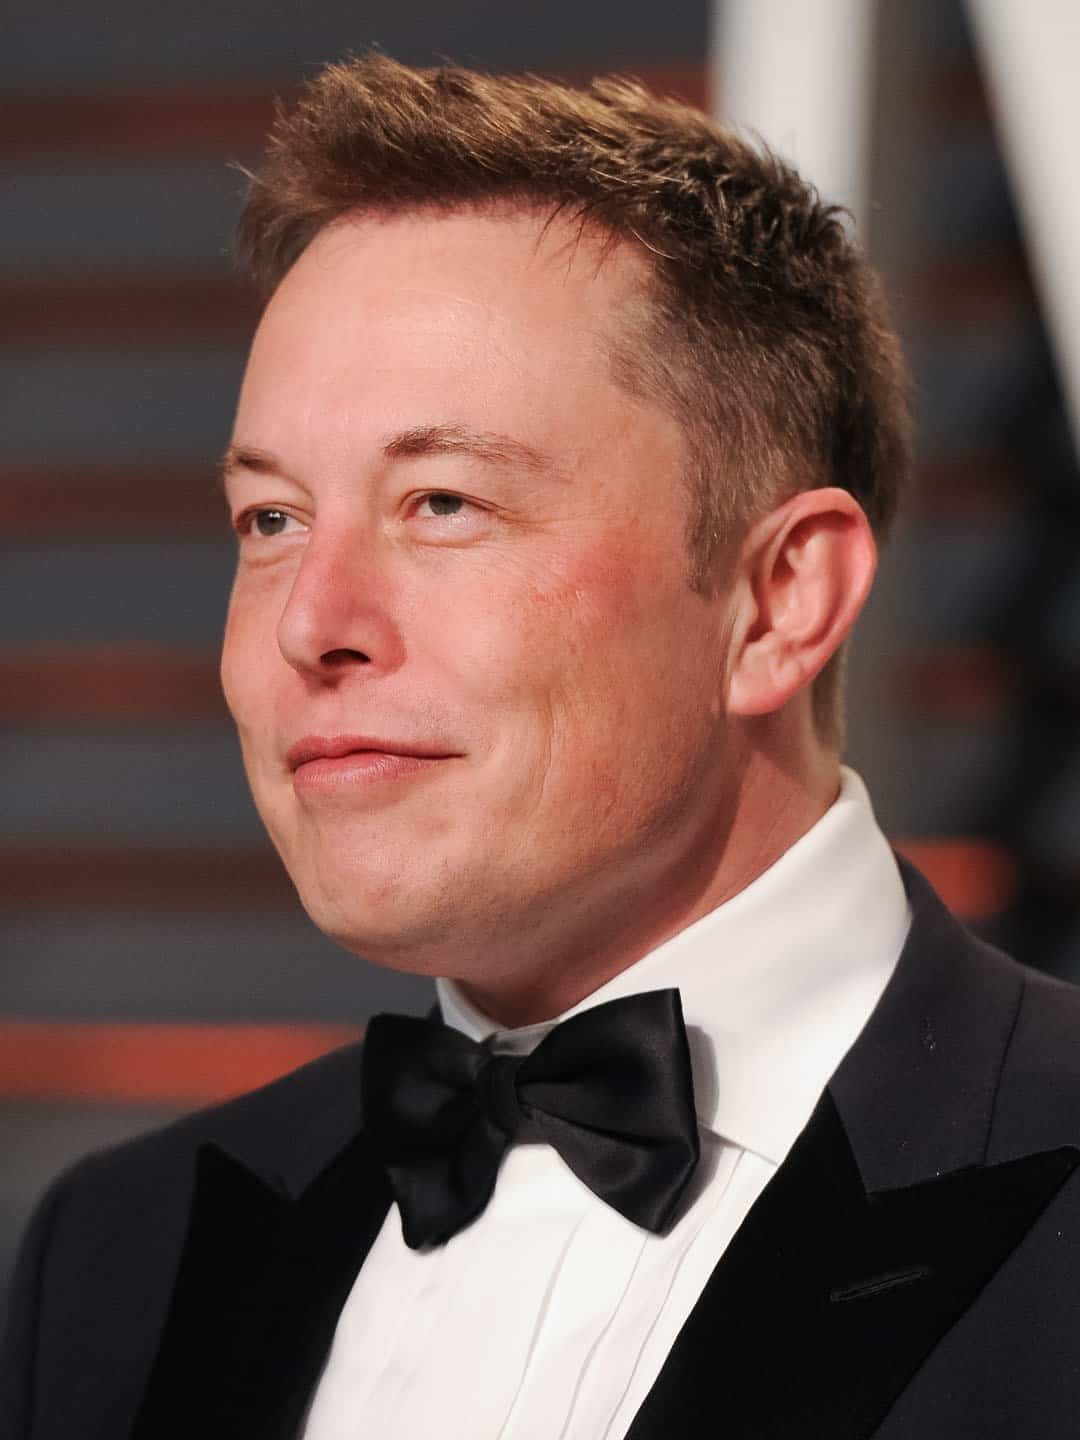 Elon Musk Biography in Hindi – Net worth, Wife, Quotes 2021